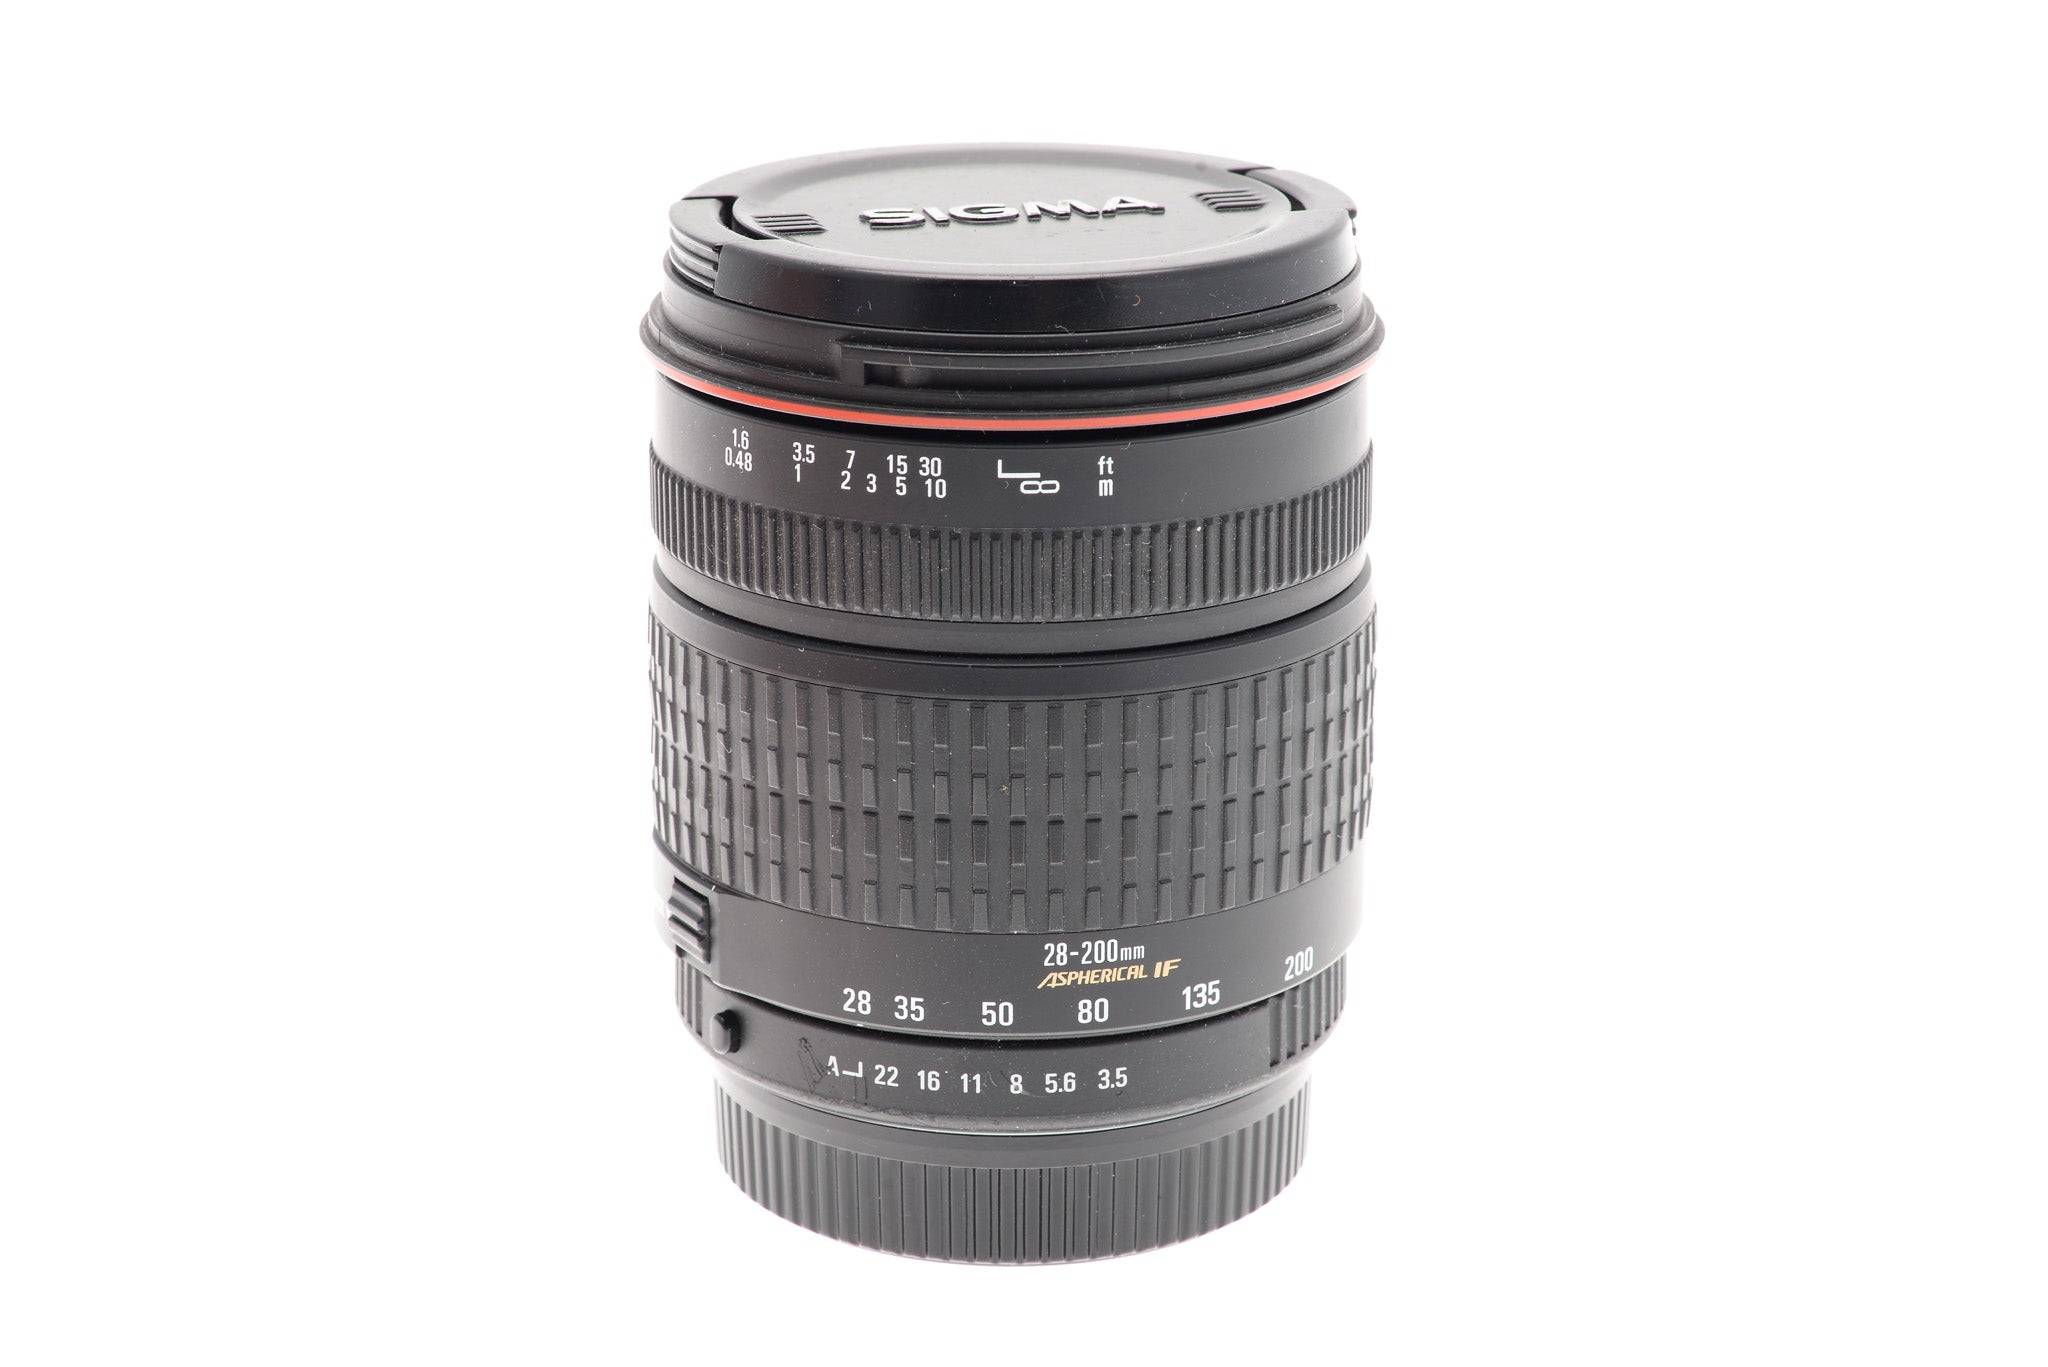 Sigma 28-200mm f3.5-5.6 Compact Hyperzoom Macro - Lens